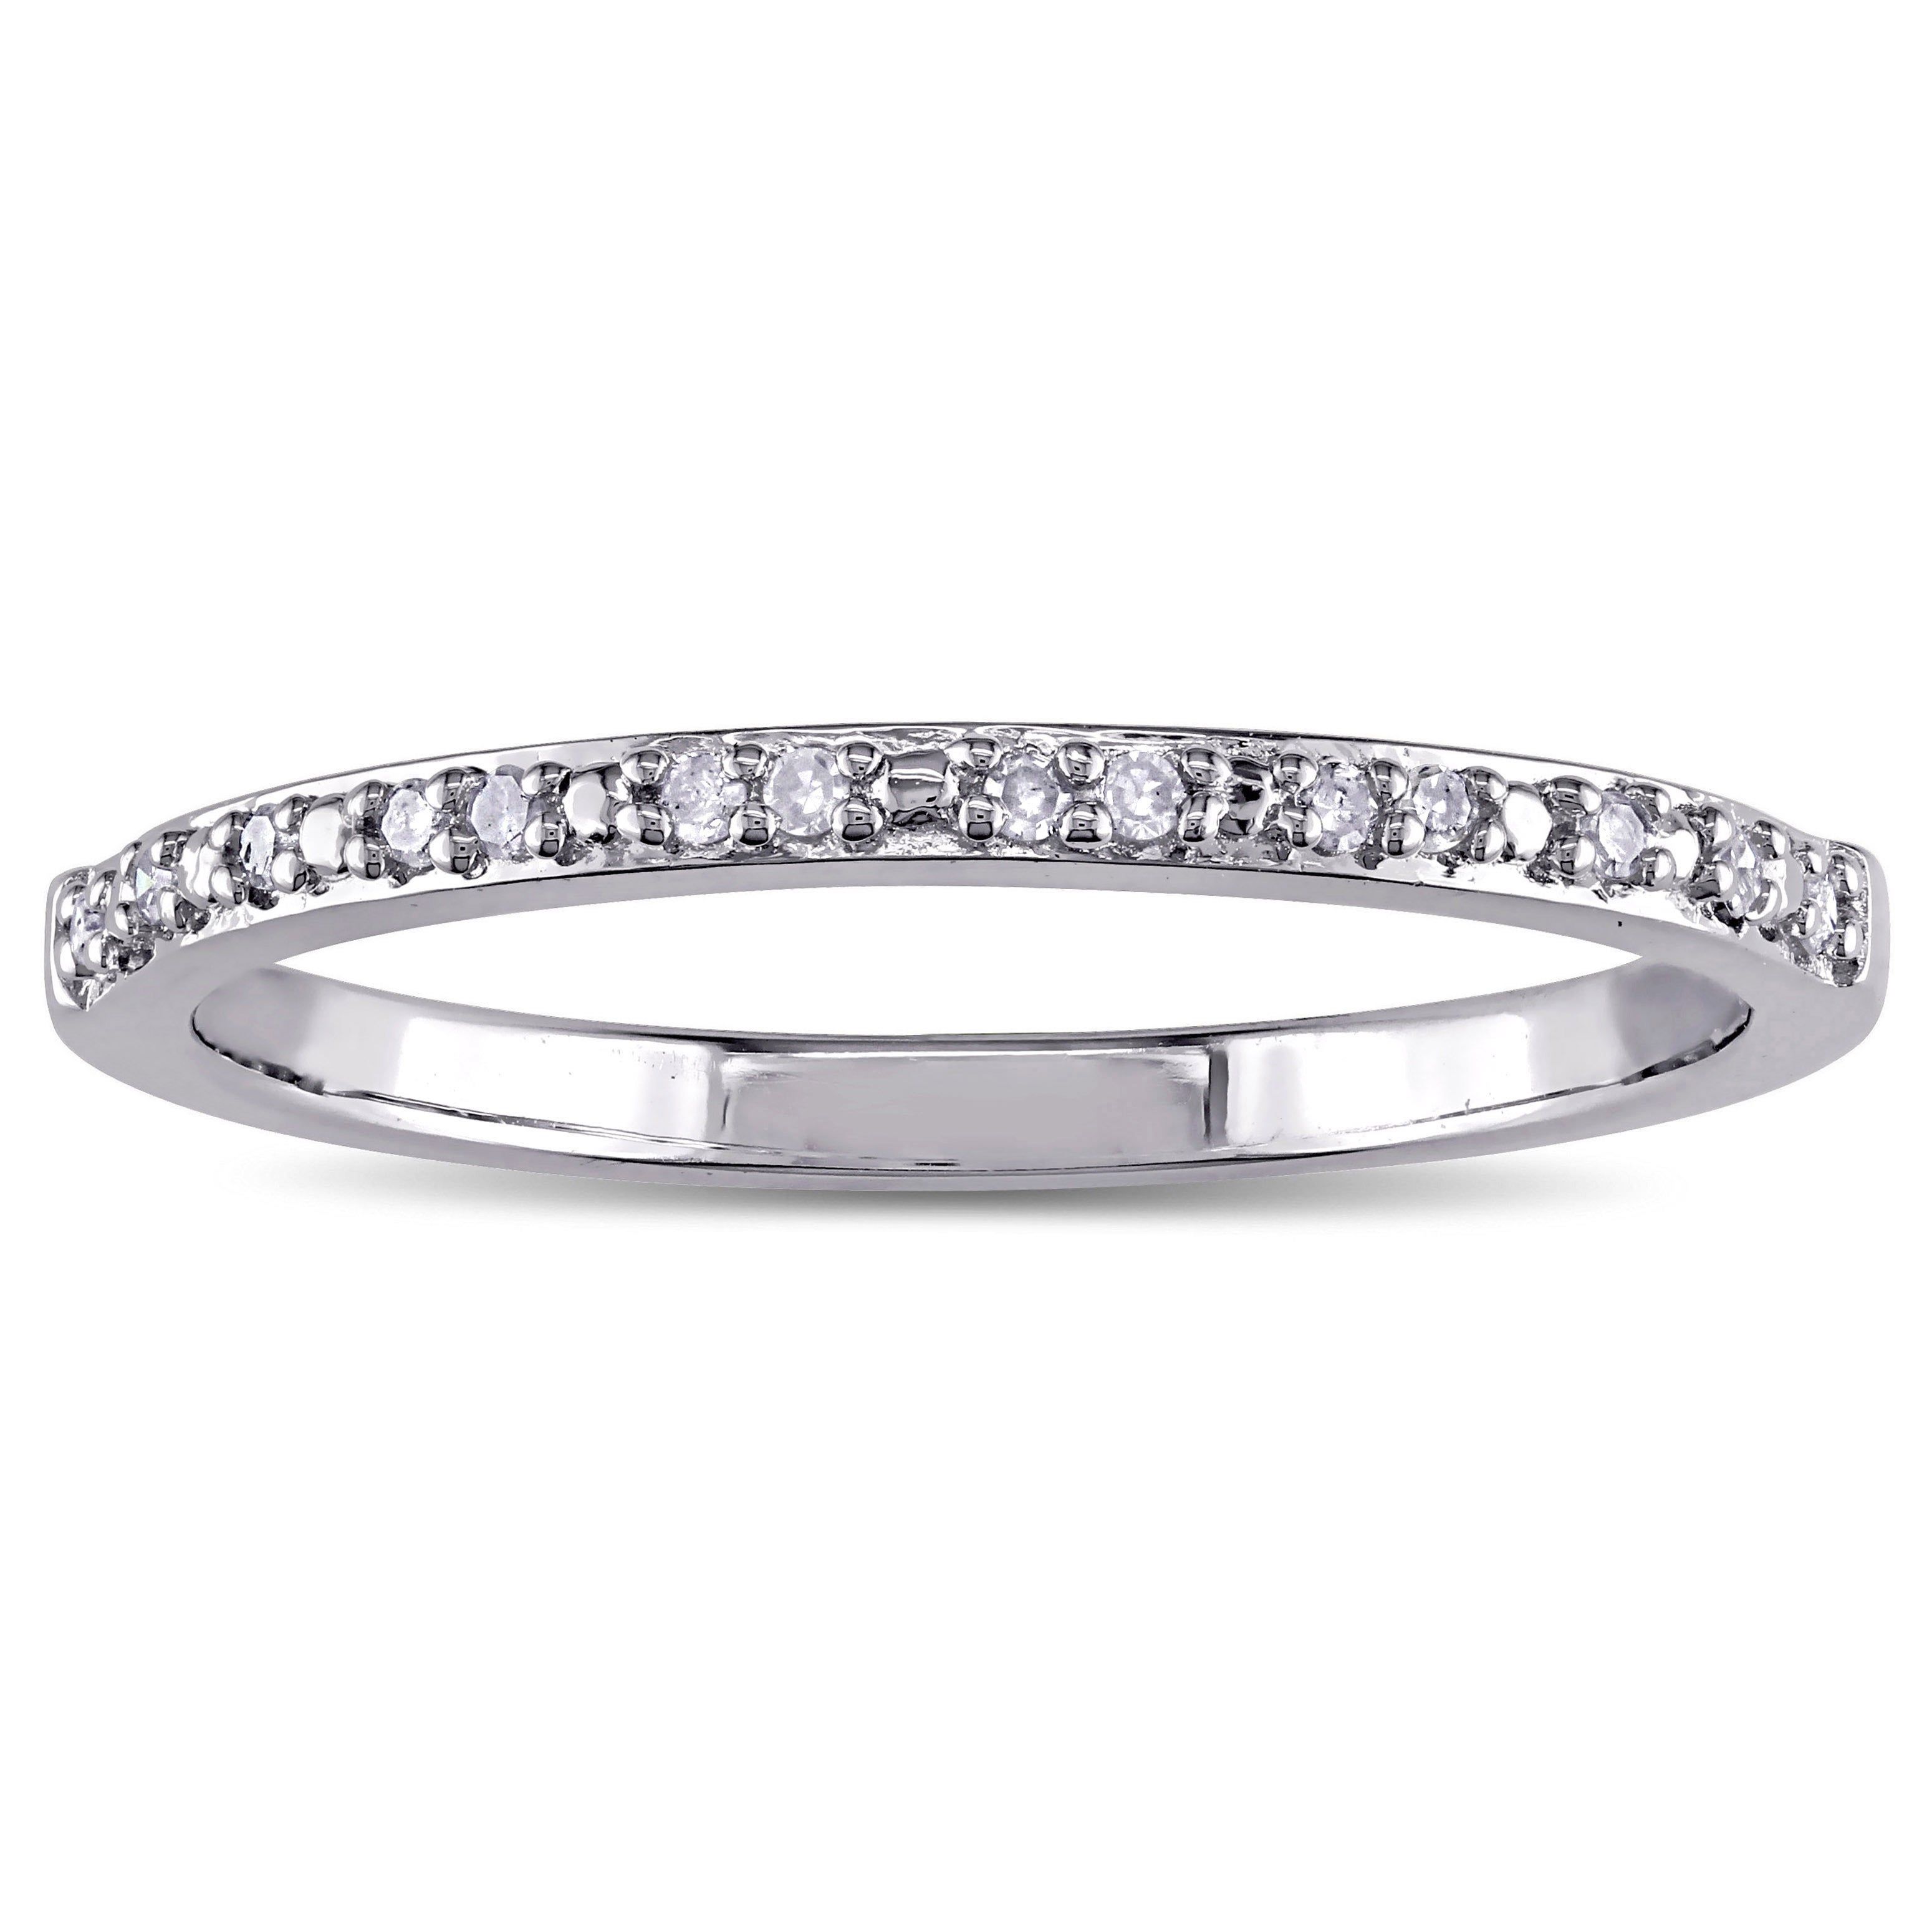 Miadora Sterling Silver Diamond Accent Wedding Band – White Regarding Current Diamond Accent Anniversary Bands In Sterling Silver (View 10 of 25)